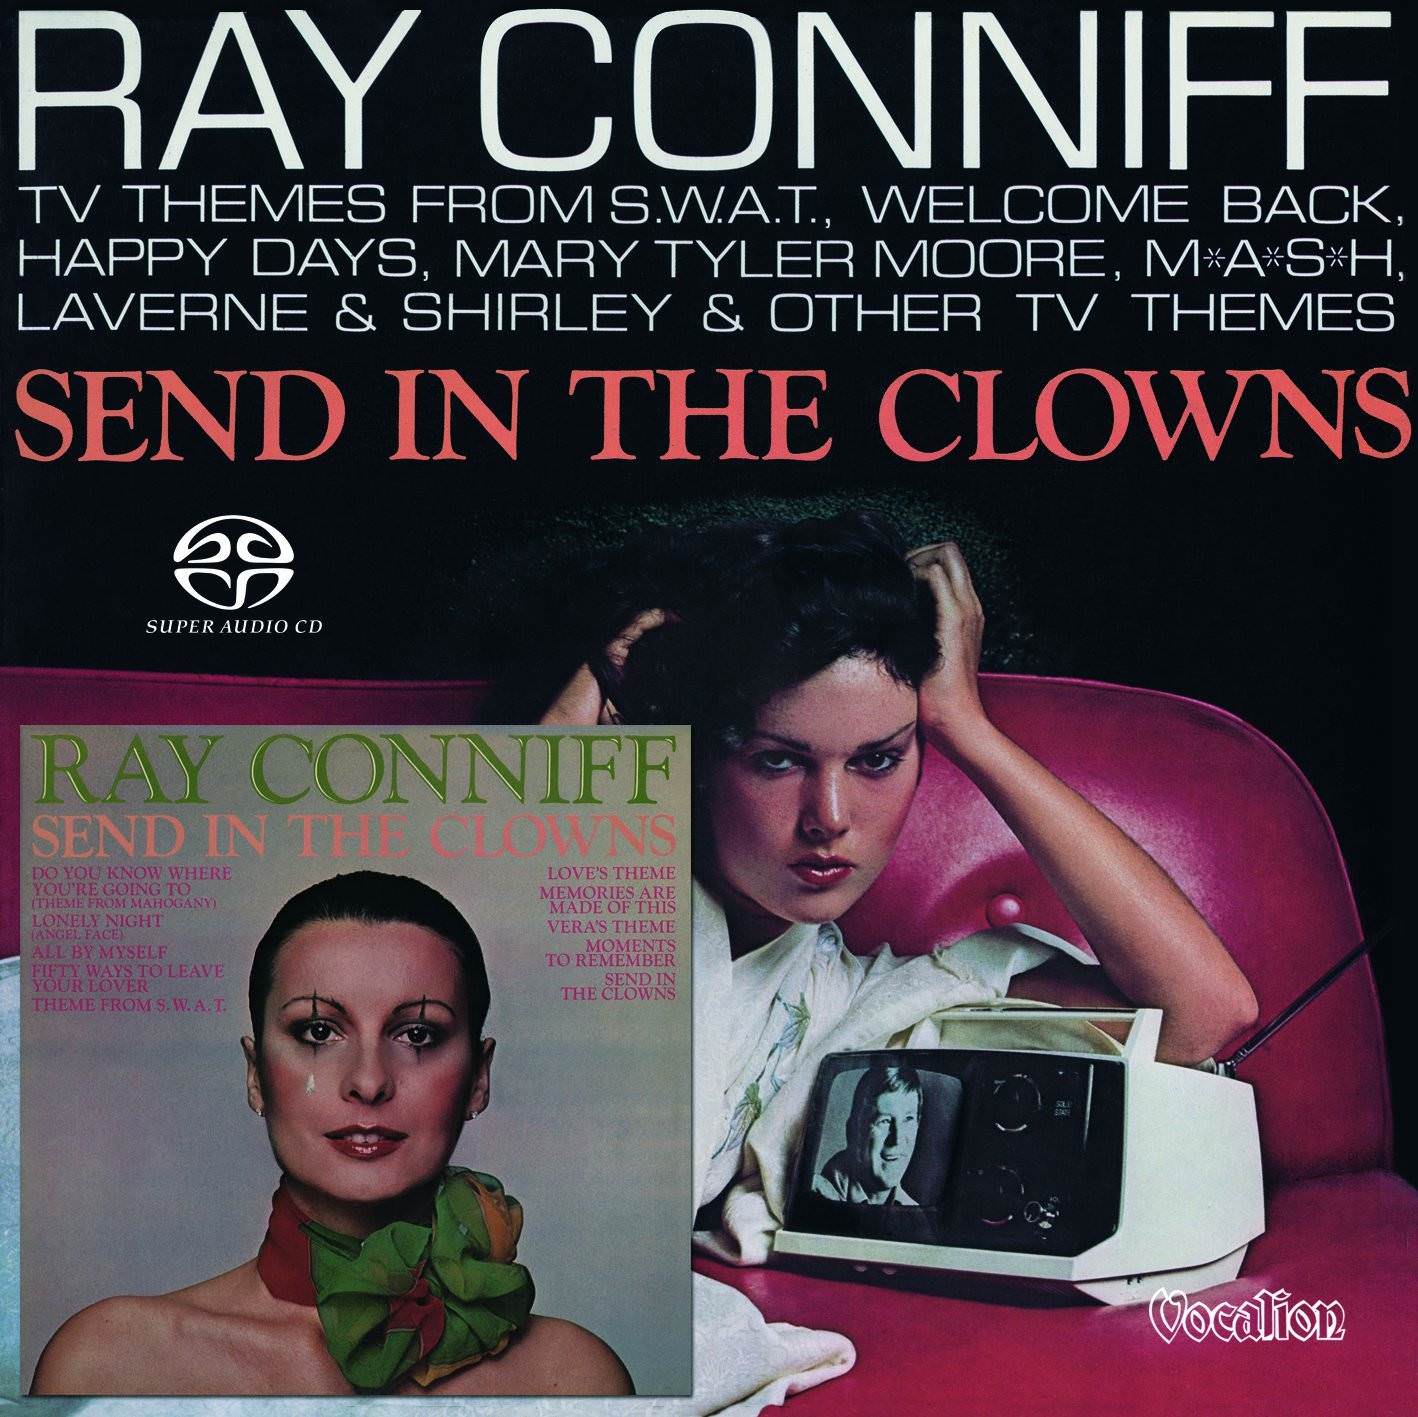 Ray Conniff – Theme from SWAT & Other TV Themes & Send In The Clowns (1976) [Reissue 2018] MCH SACD ISO + Hi-Res FLAC